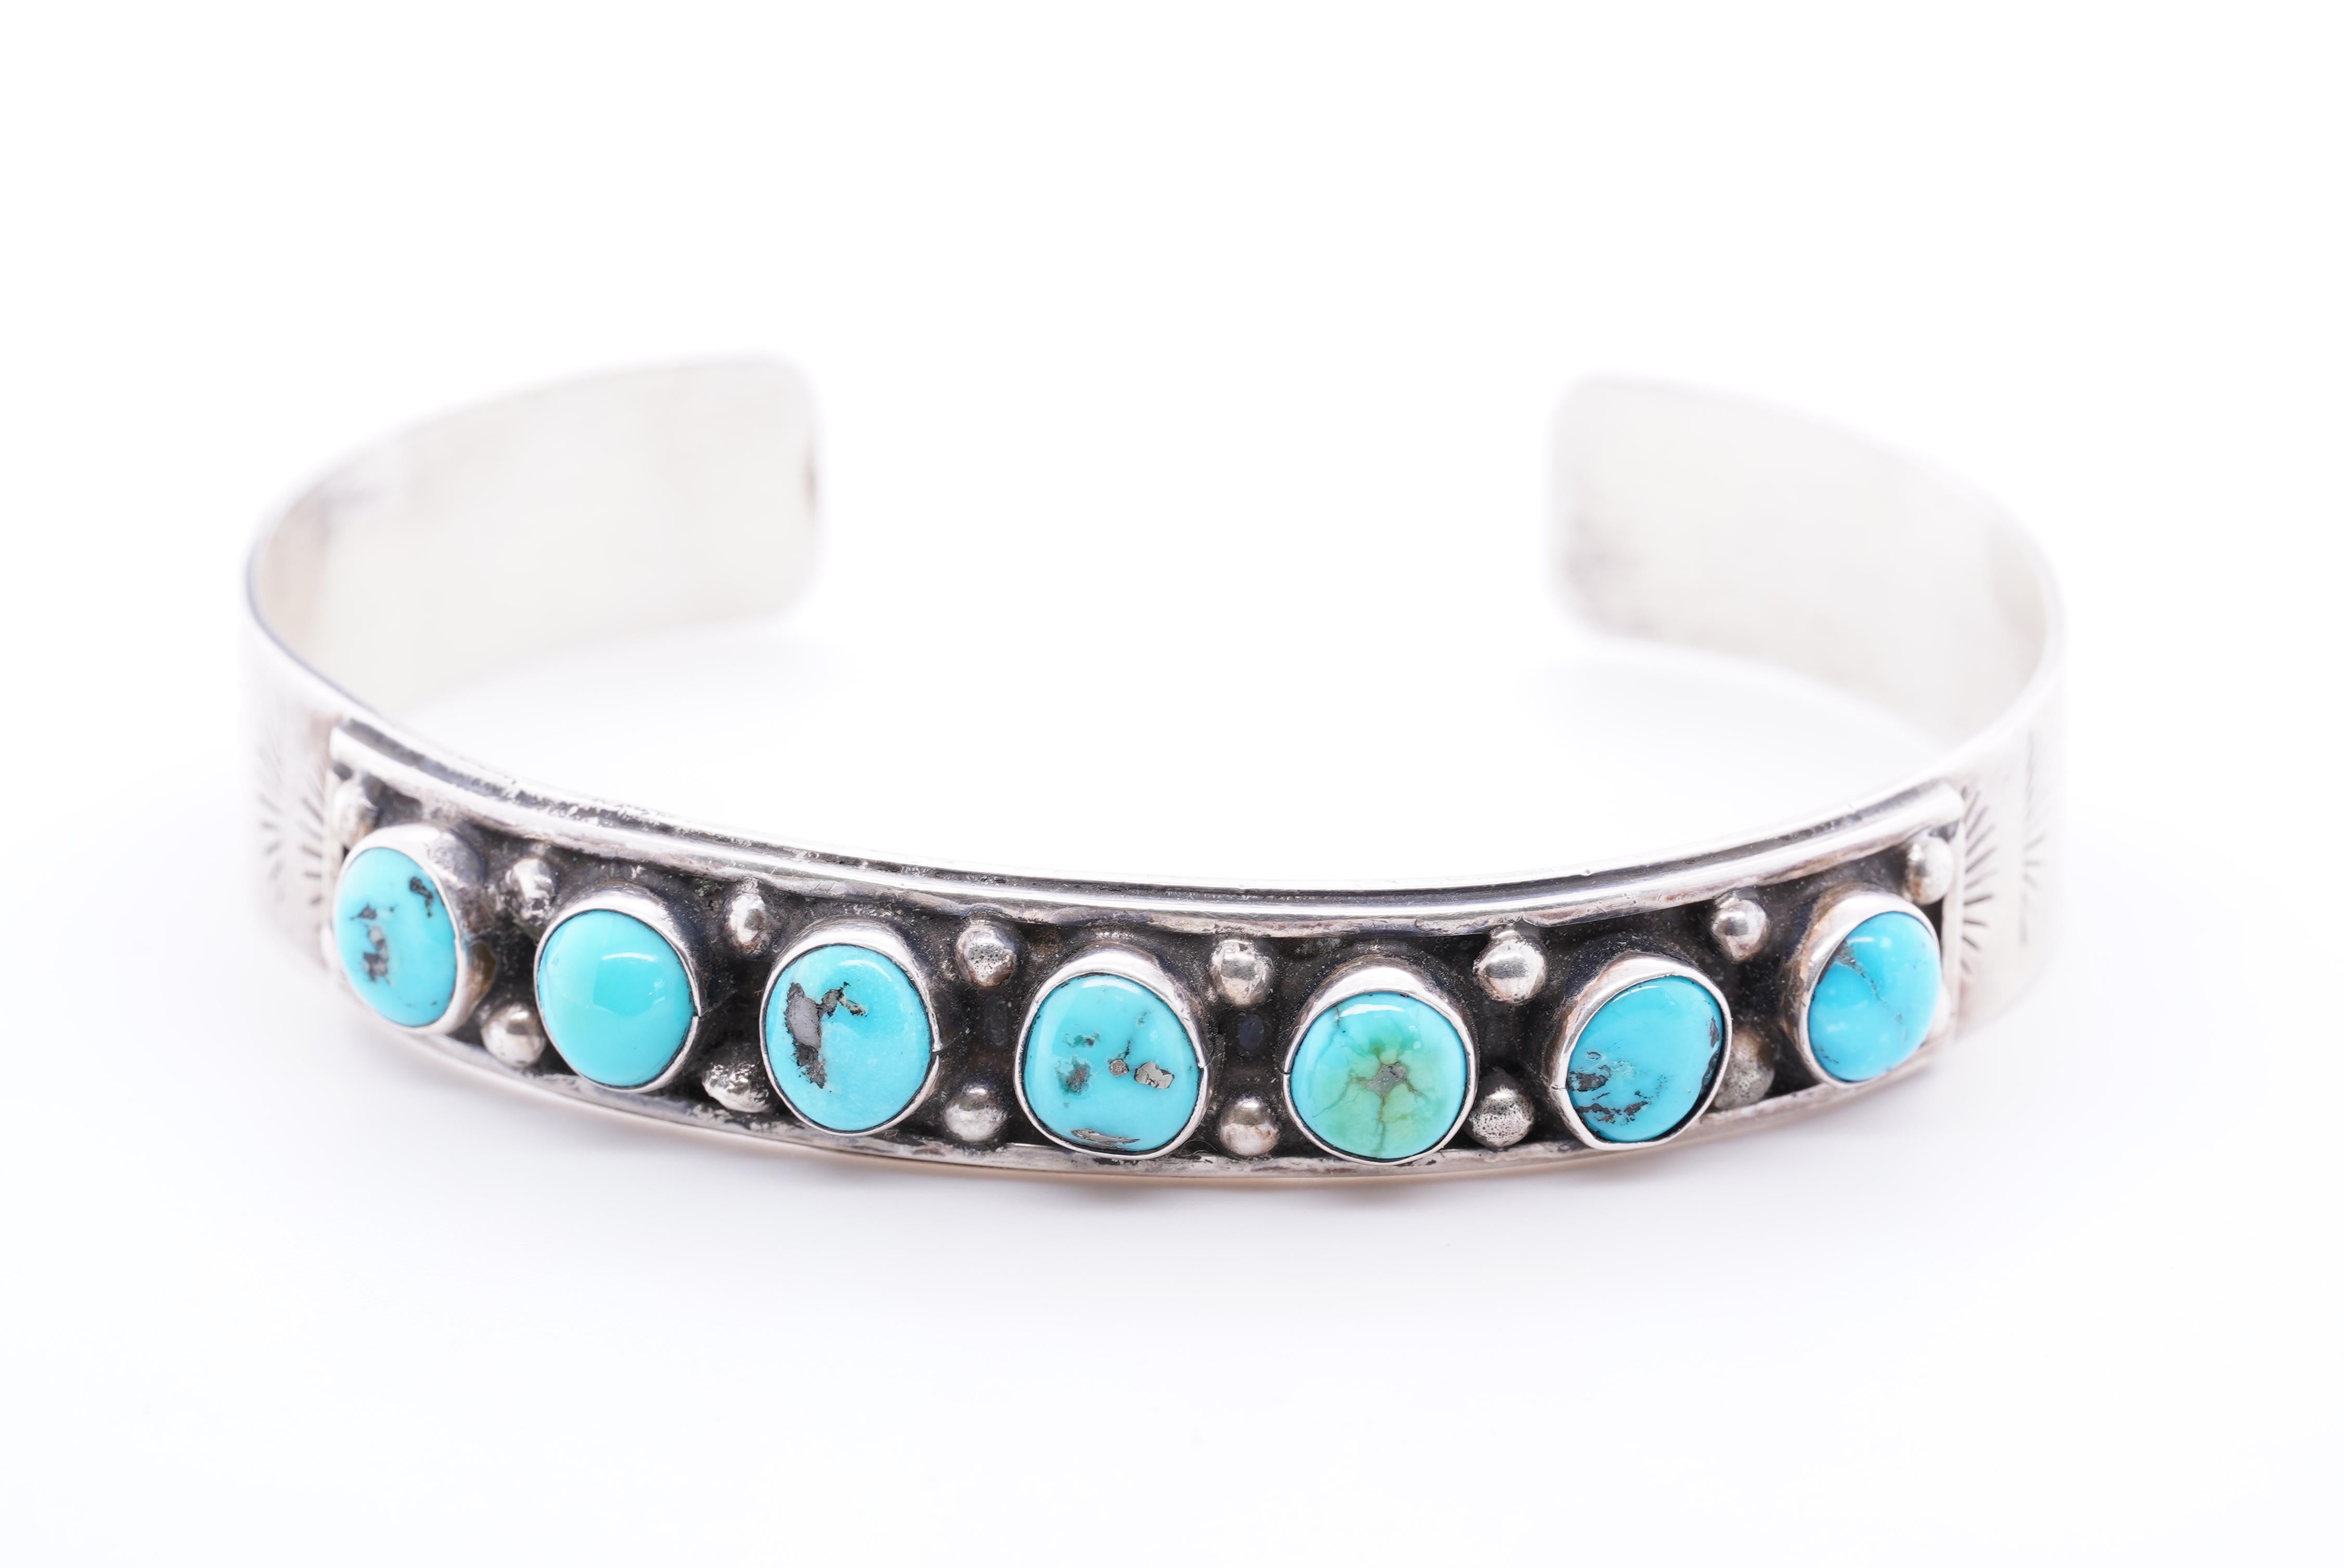 Native American Vintage Navajo Kingman Bright Blue Round Turquoise Sterling Silver Cuff Bracelet